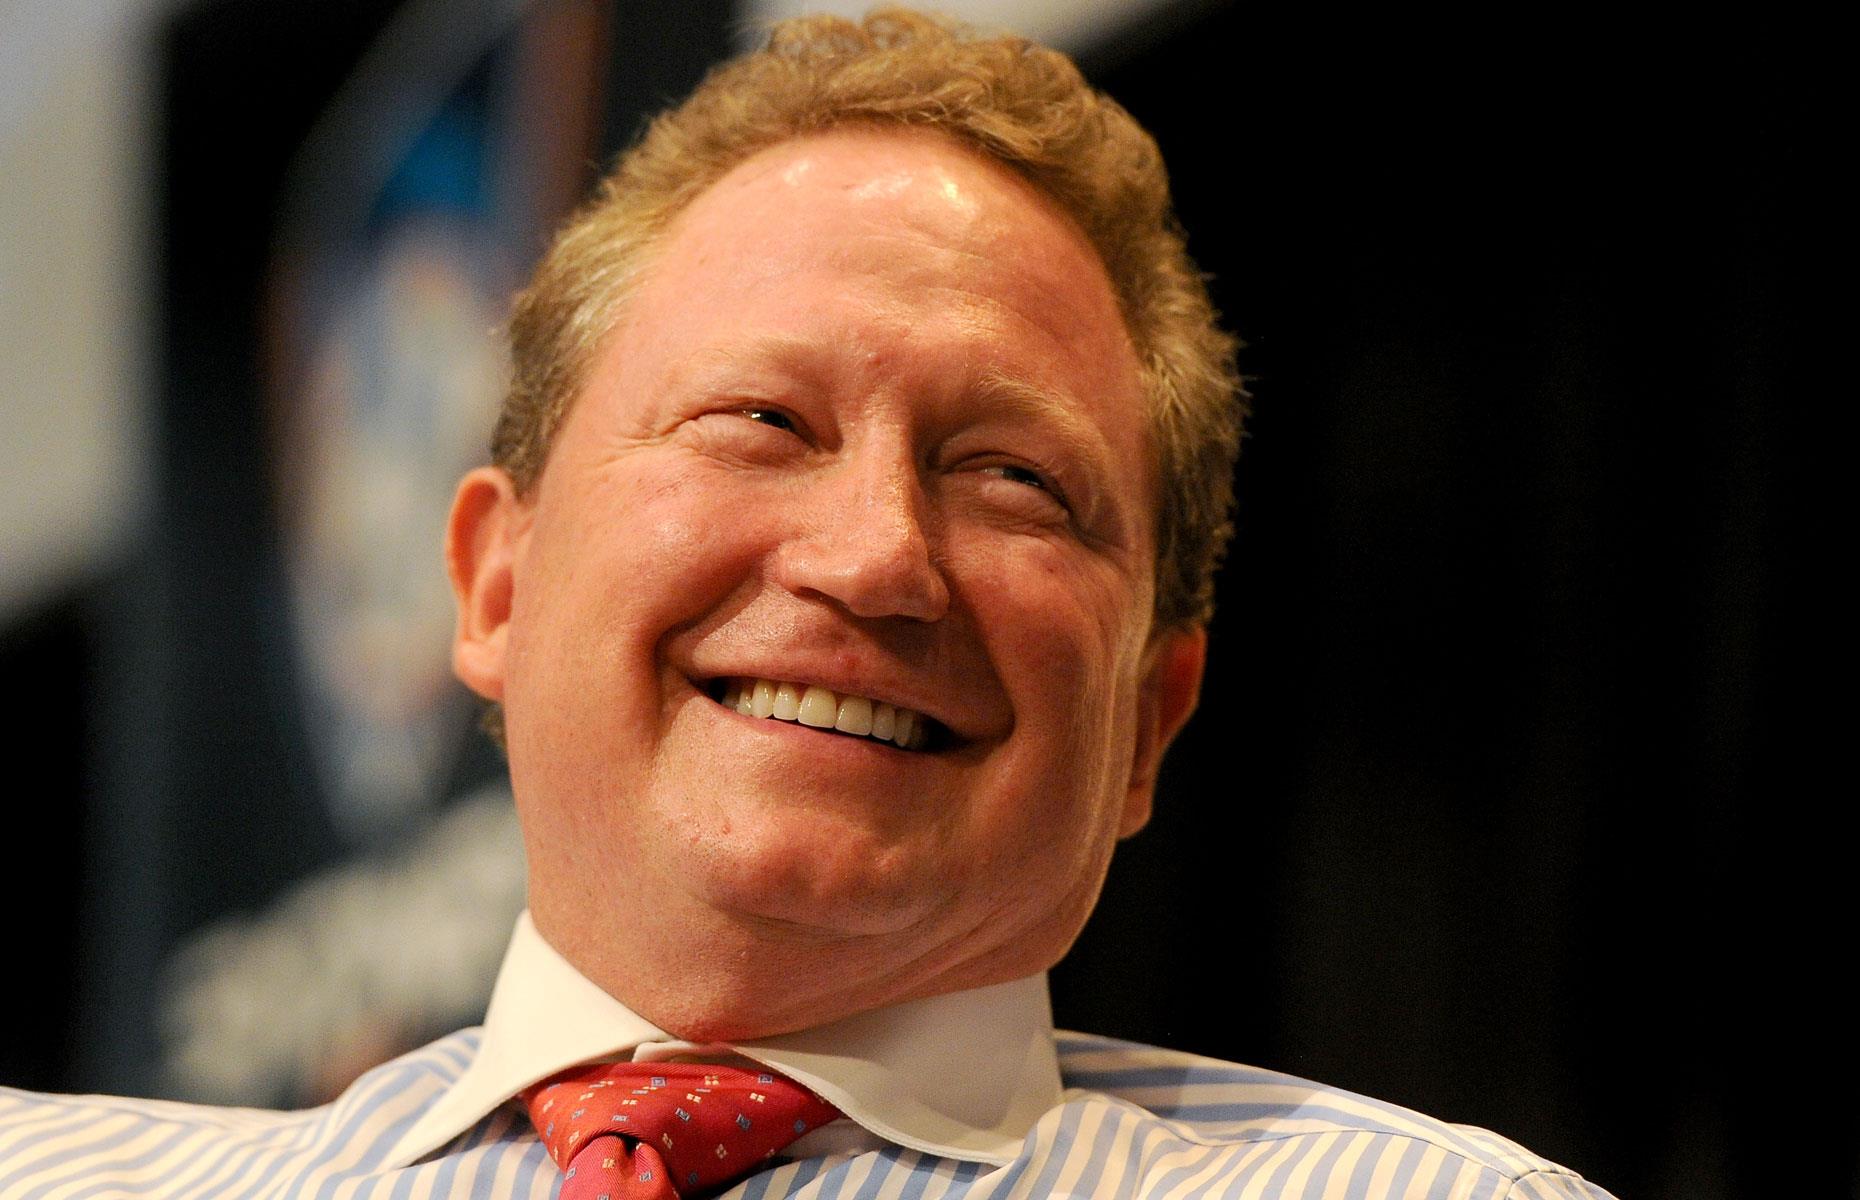 Joint 30. Andrew 'Twiggy' Forrest: 1.3 million hectares